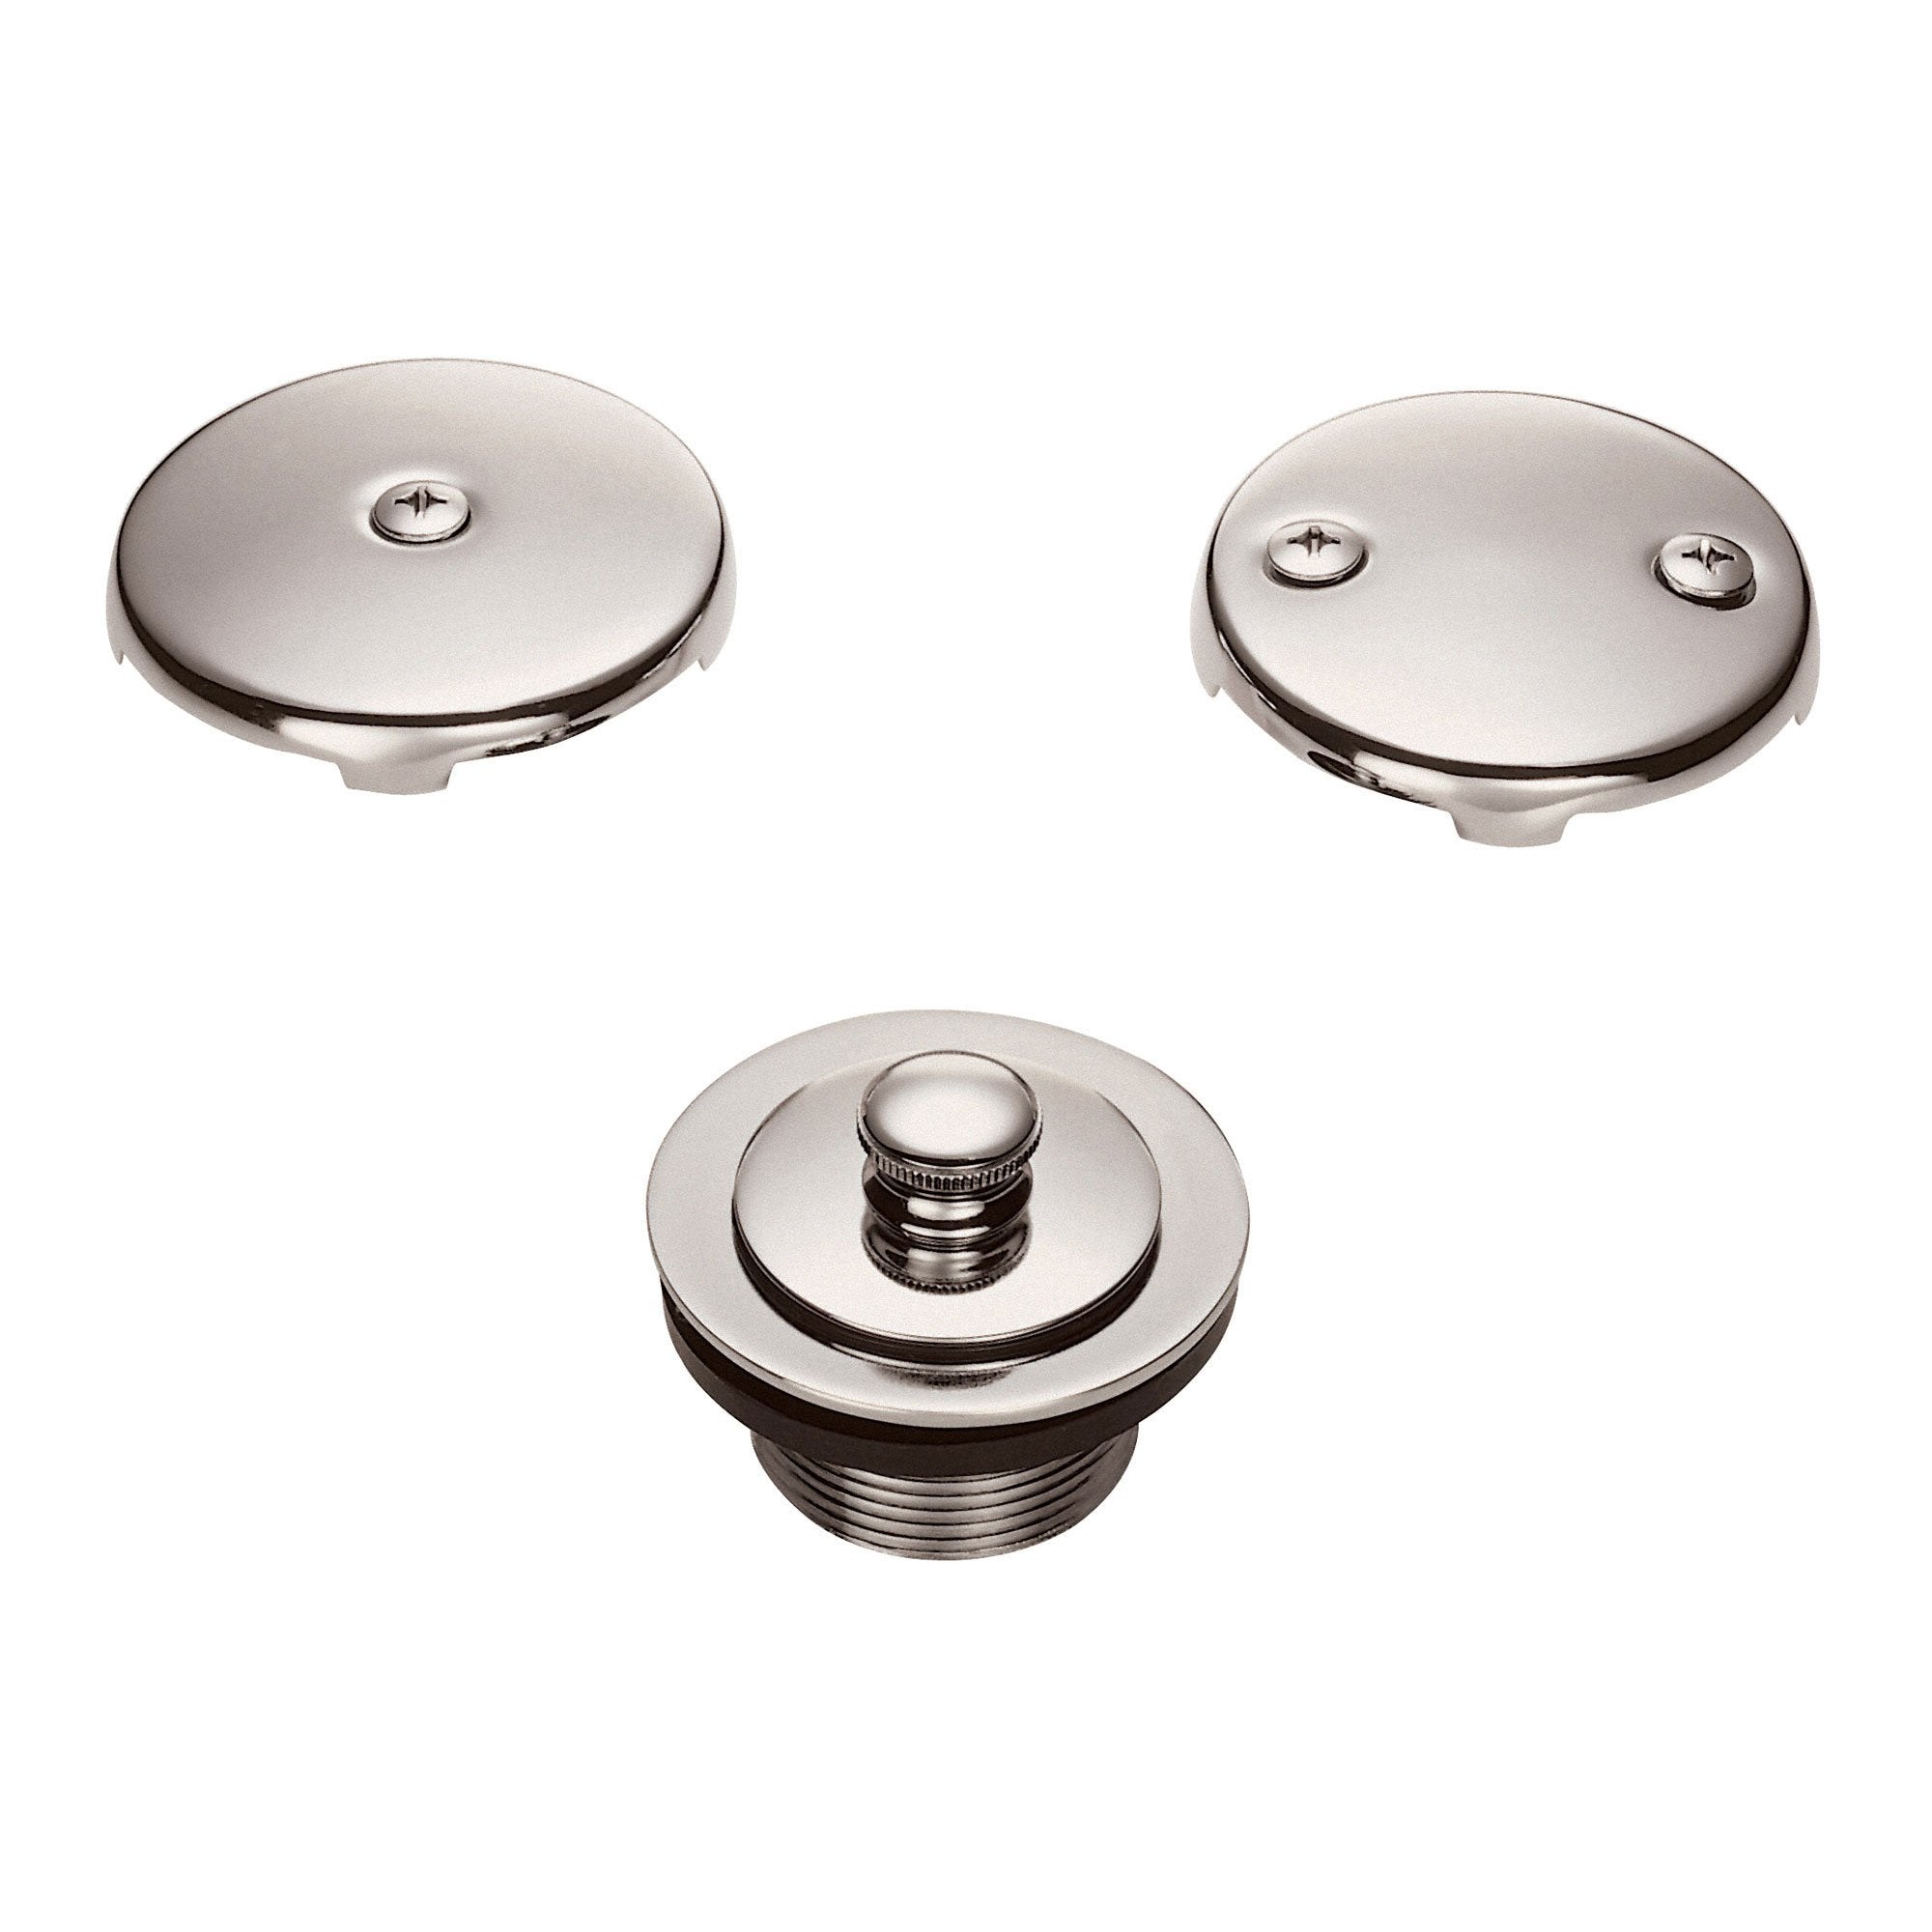 Danze Brushed Nickel Lift & Turn Bath Tub Drain and Overflow Cover Plate Kit